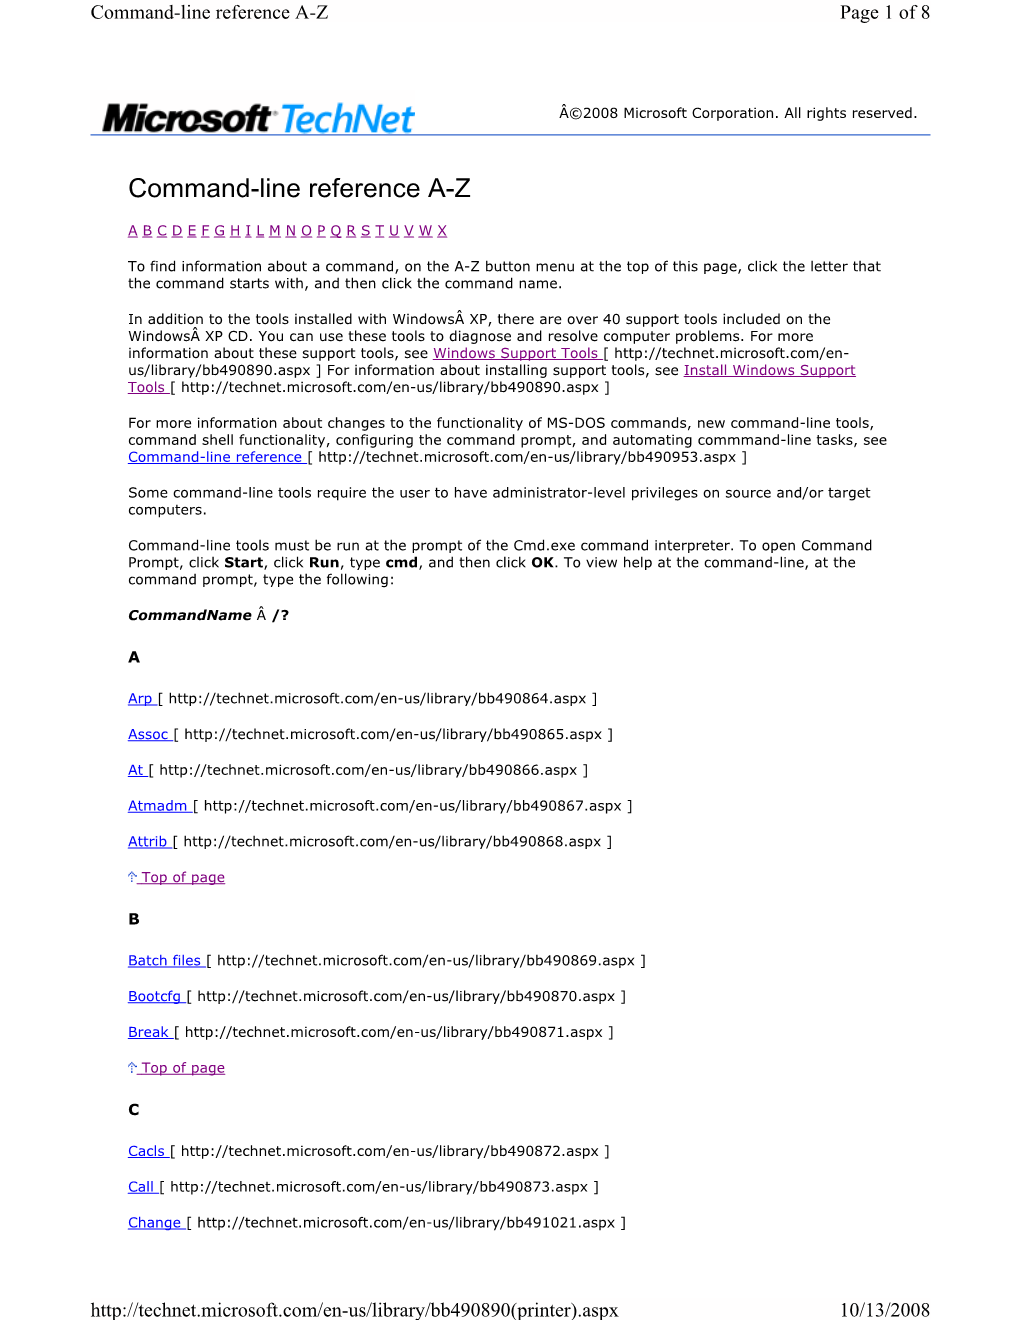 Command-Line Reference A-Z Page 1 of 8